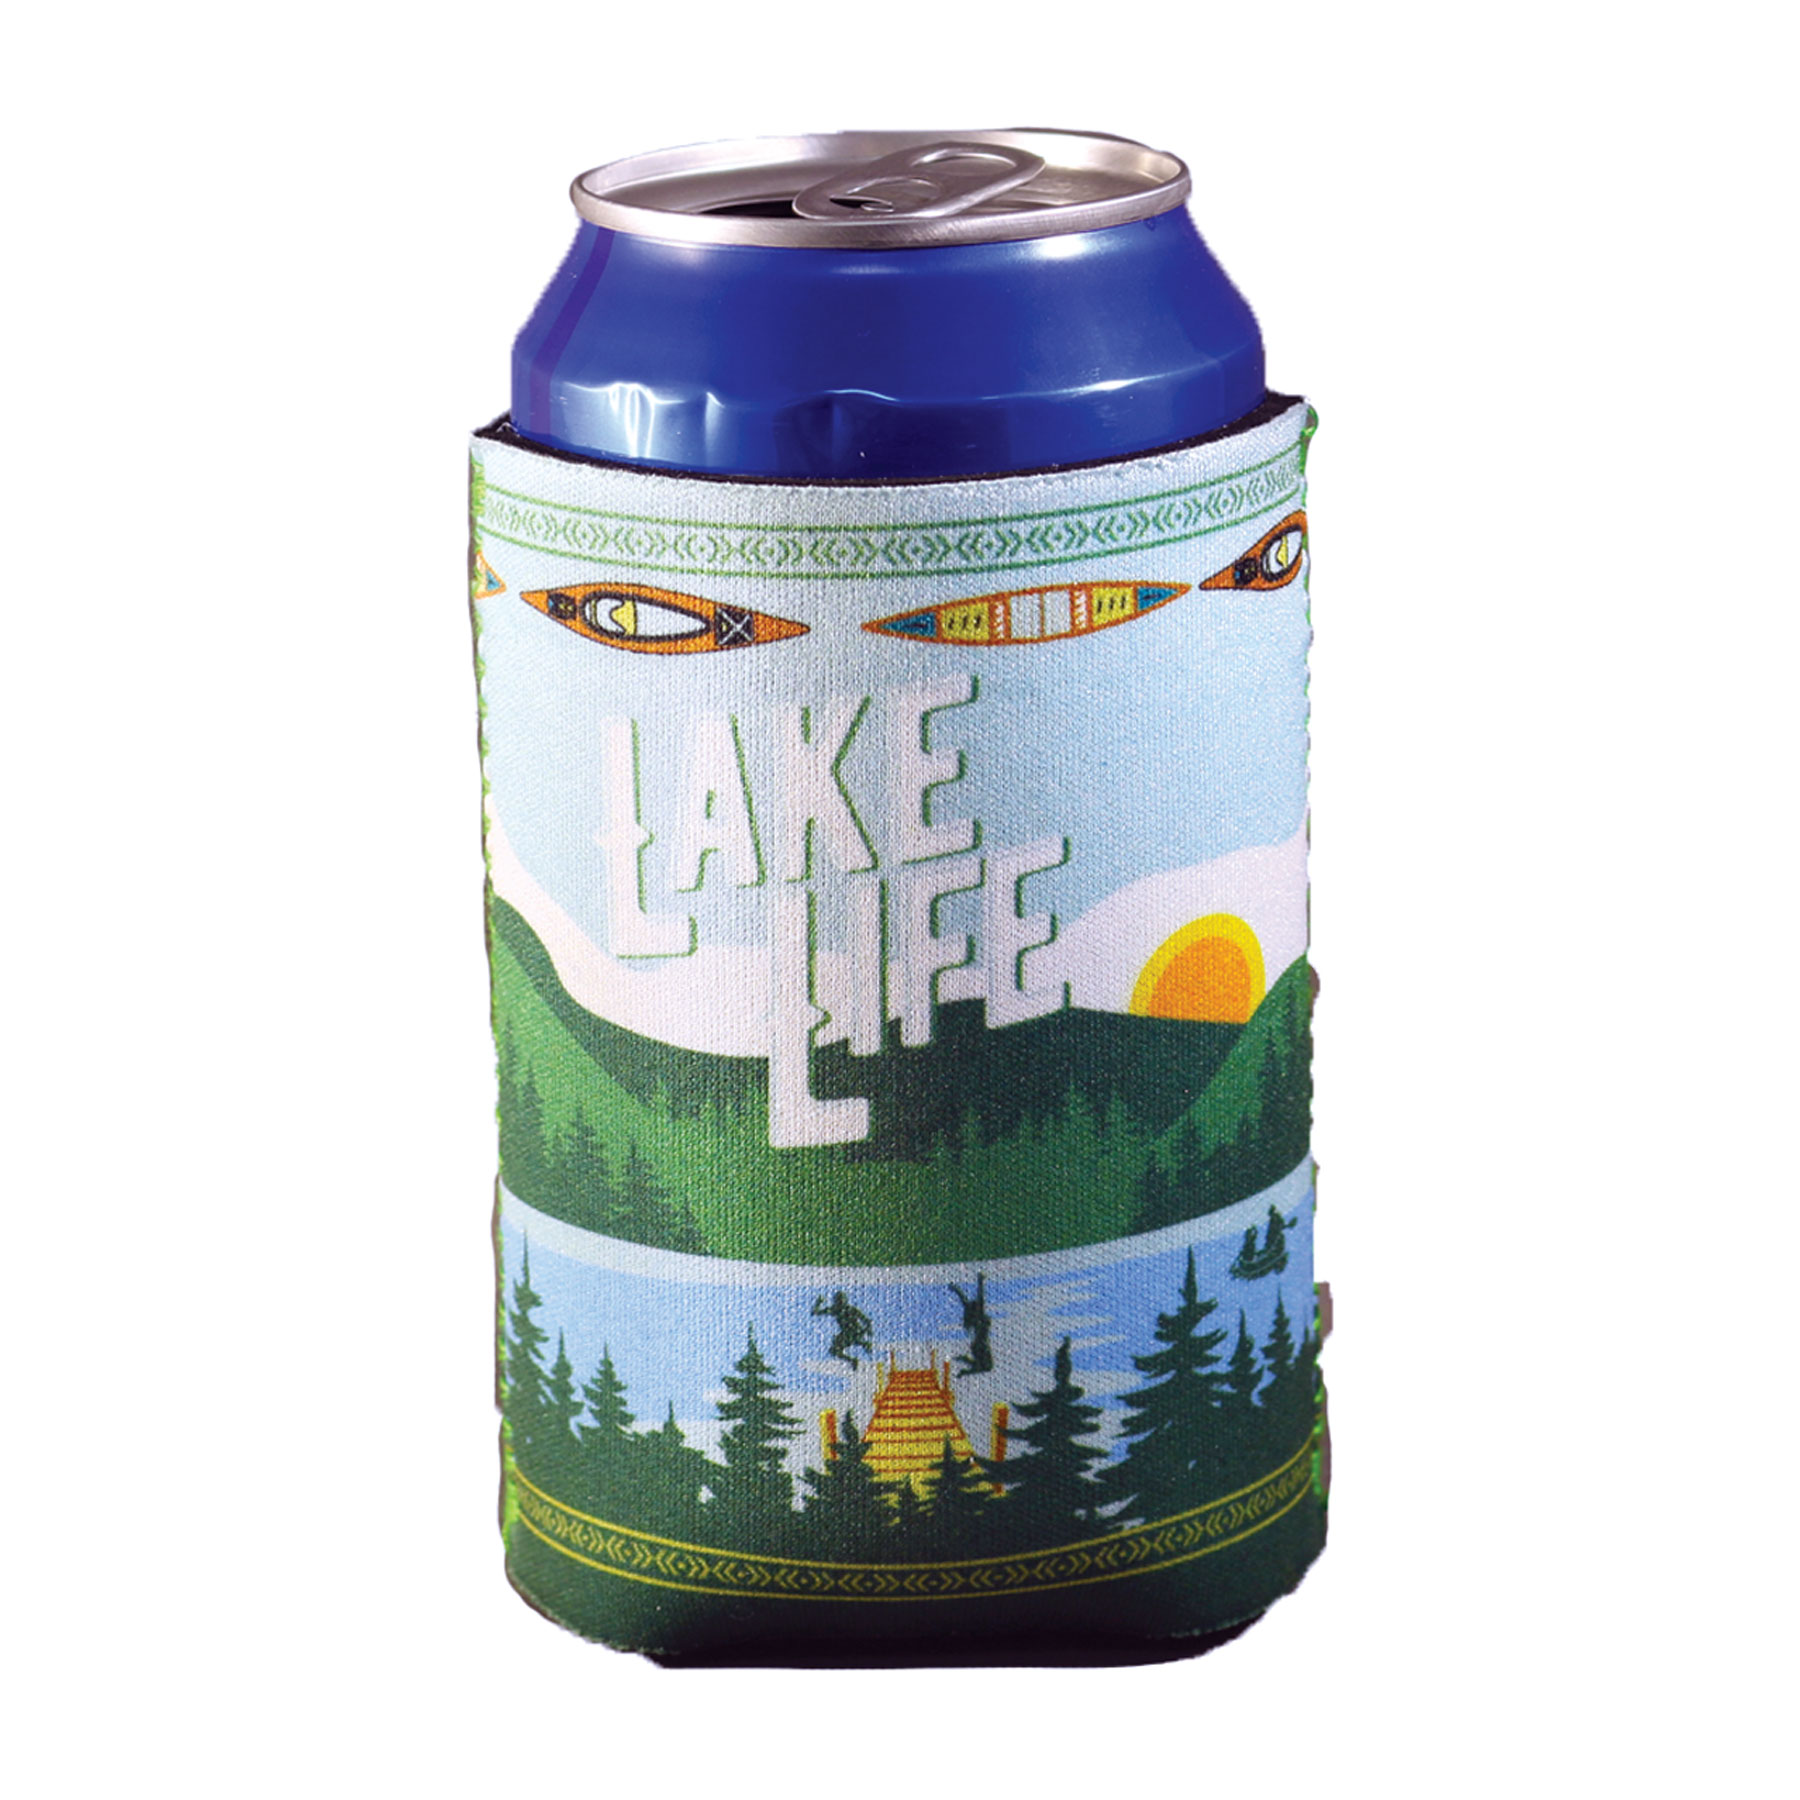 LAKE LIFE DAY SCENE CAN COOLER